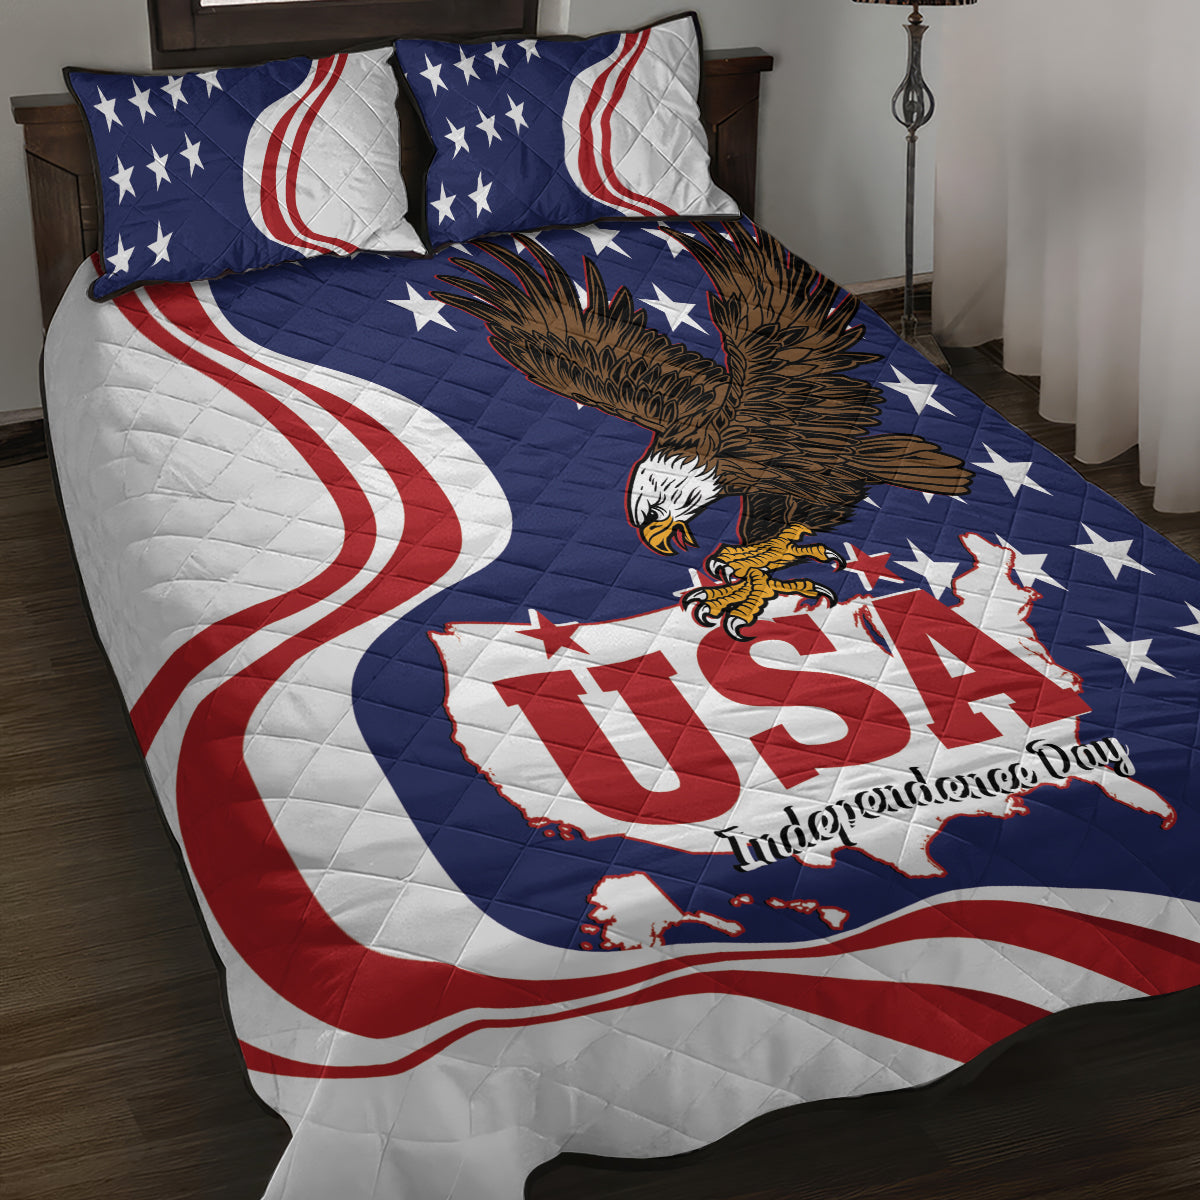 United States Independence Day Quilt Bed Set USA Bald Eagle Happy 4th Of July